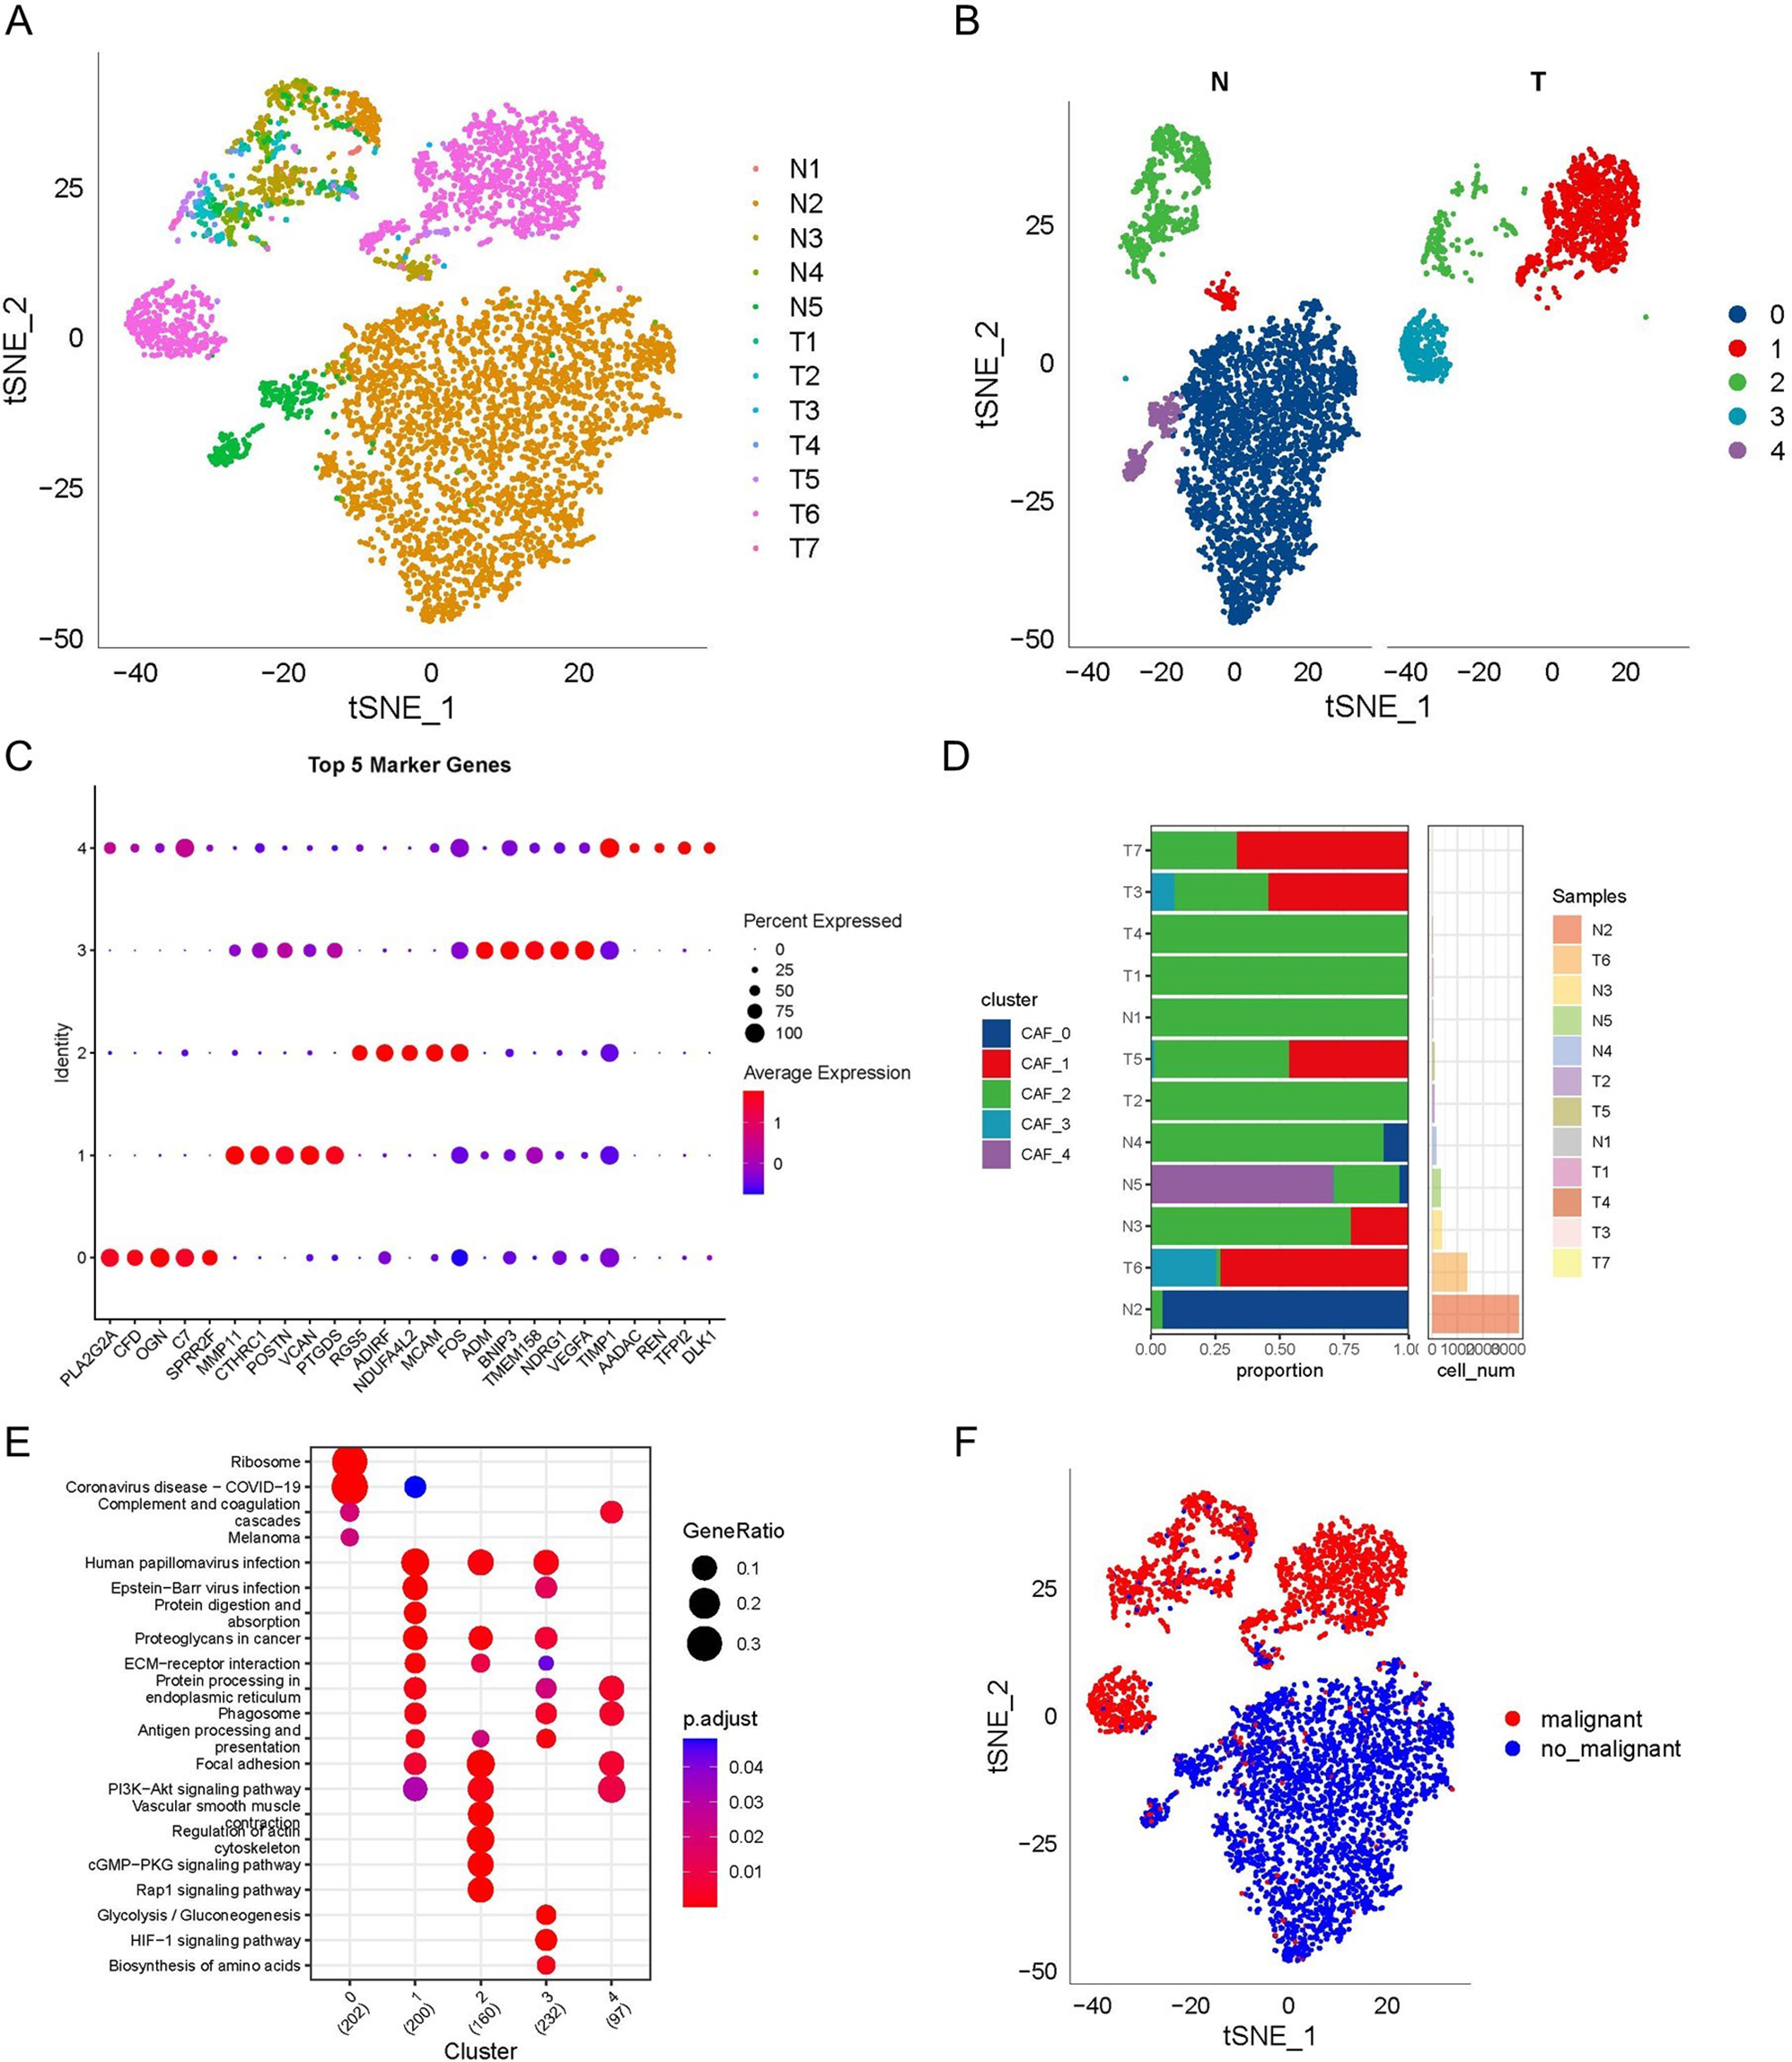 Integration of single-cell RNA-seq and bulk RNA-seq data to construct and validate a cancer-associated fibroblast-related prognostic signature for patients with ovarian cancer